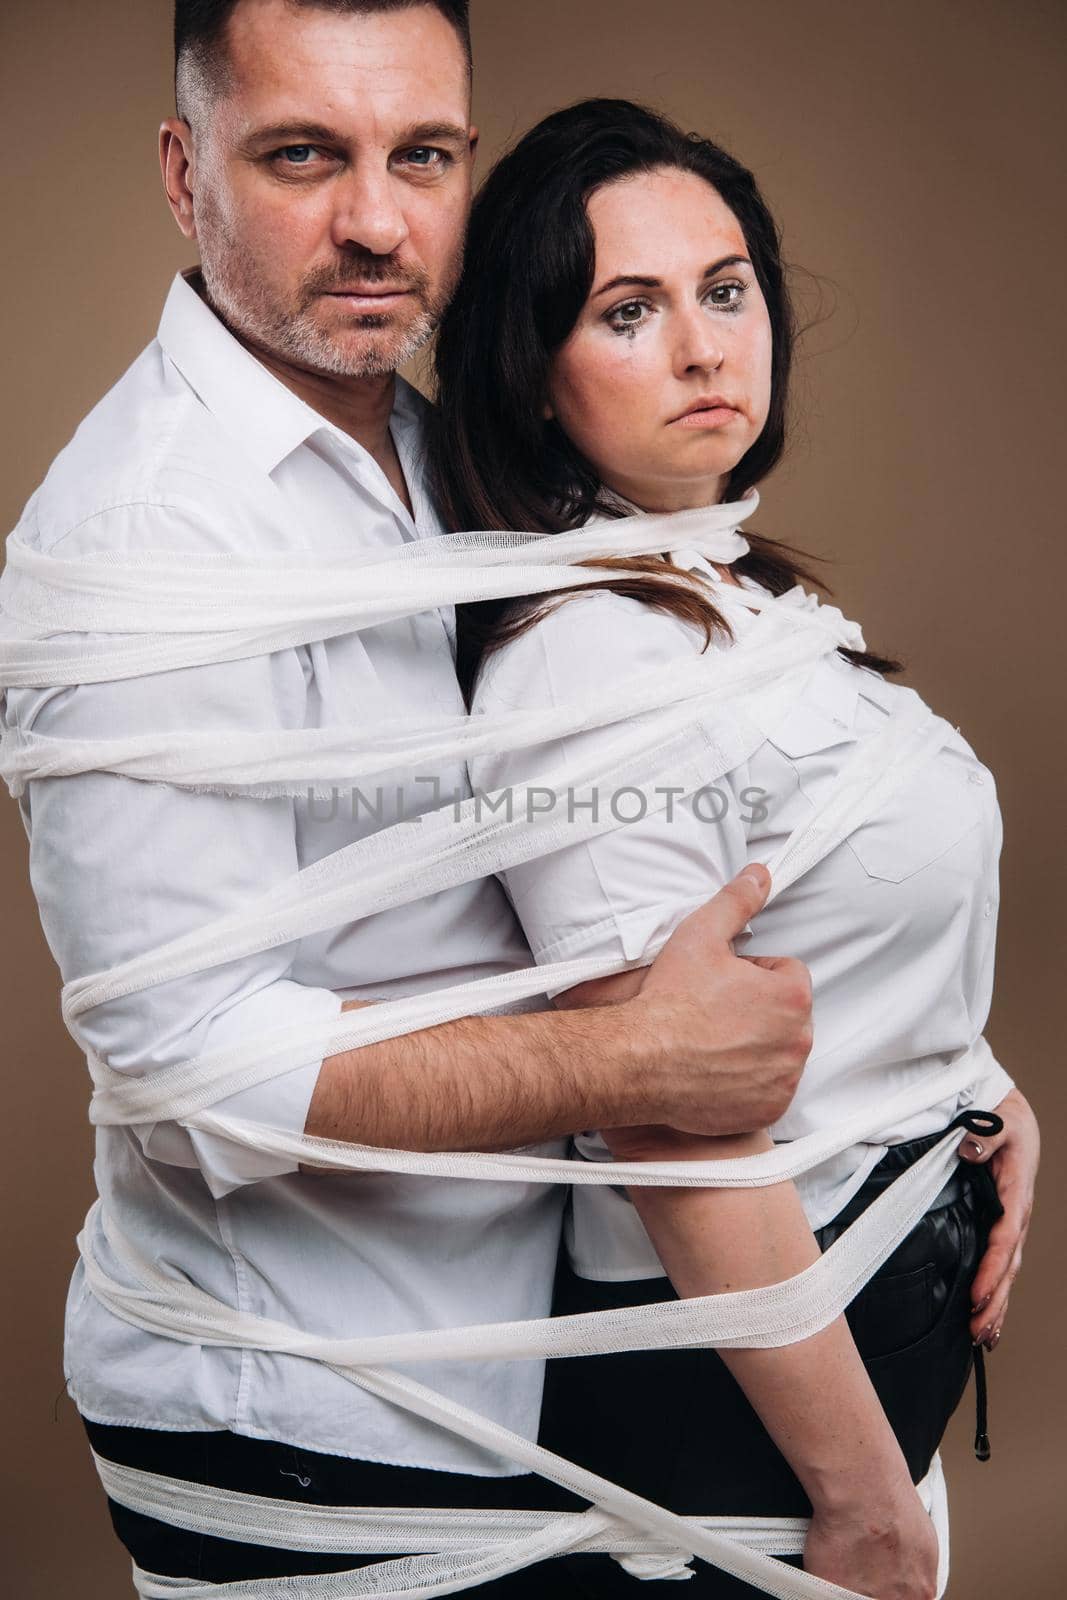 An aggressive man embraces a battered woman and is wrapped in bandages together. Domestic violence.